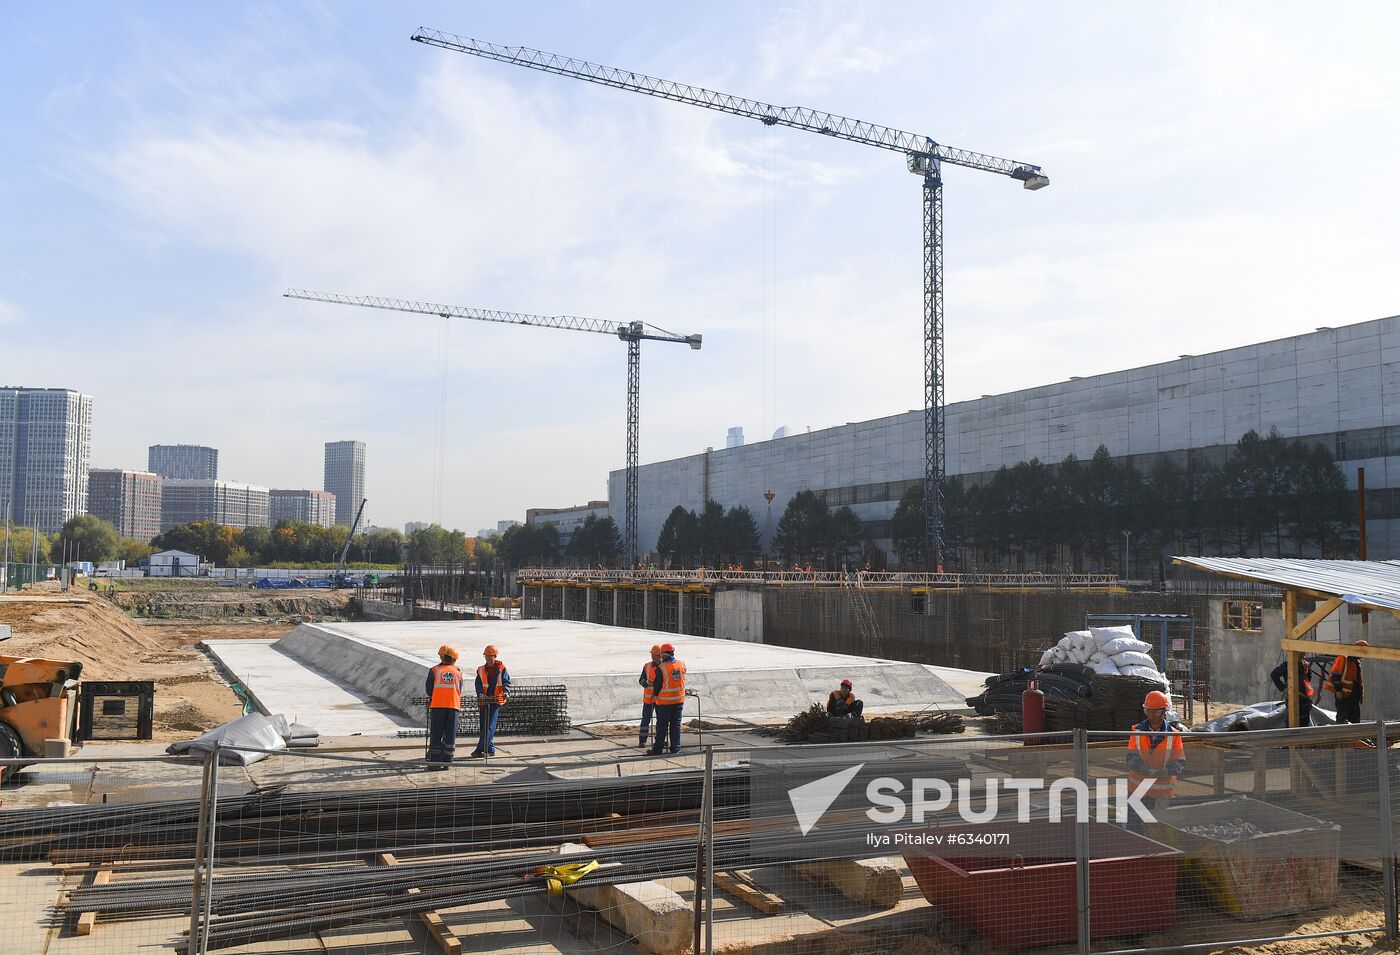 Russia National Space Center Construction